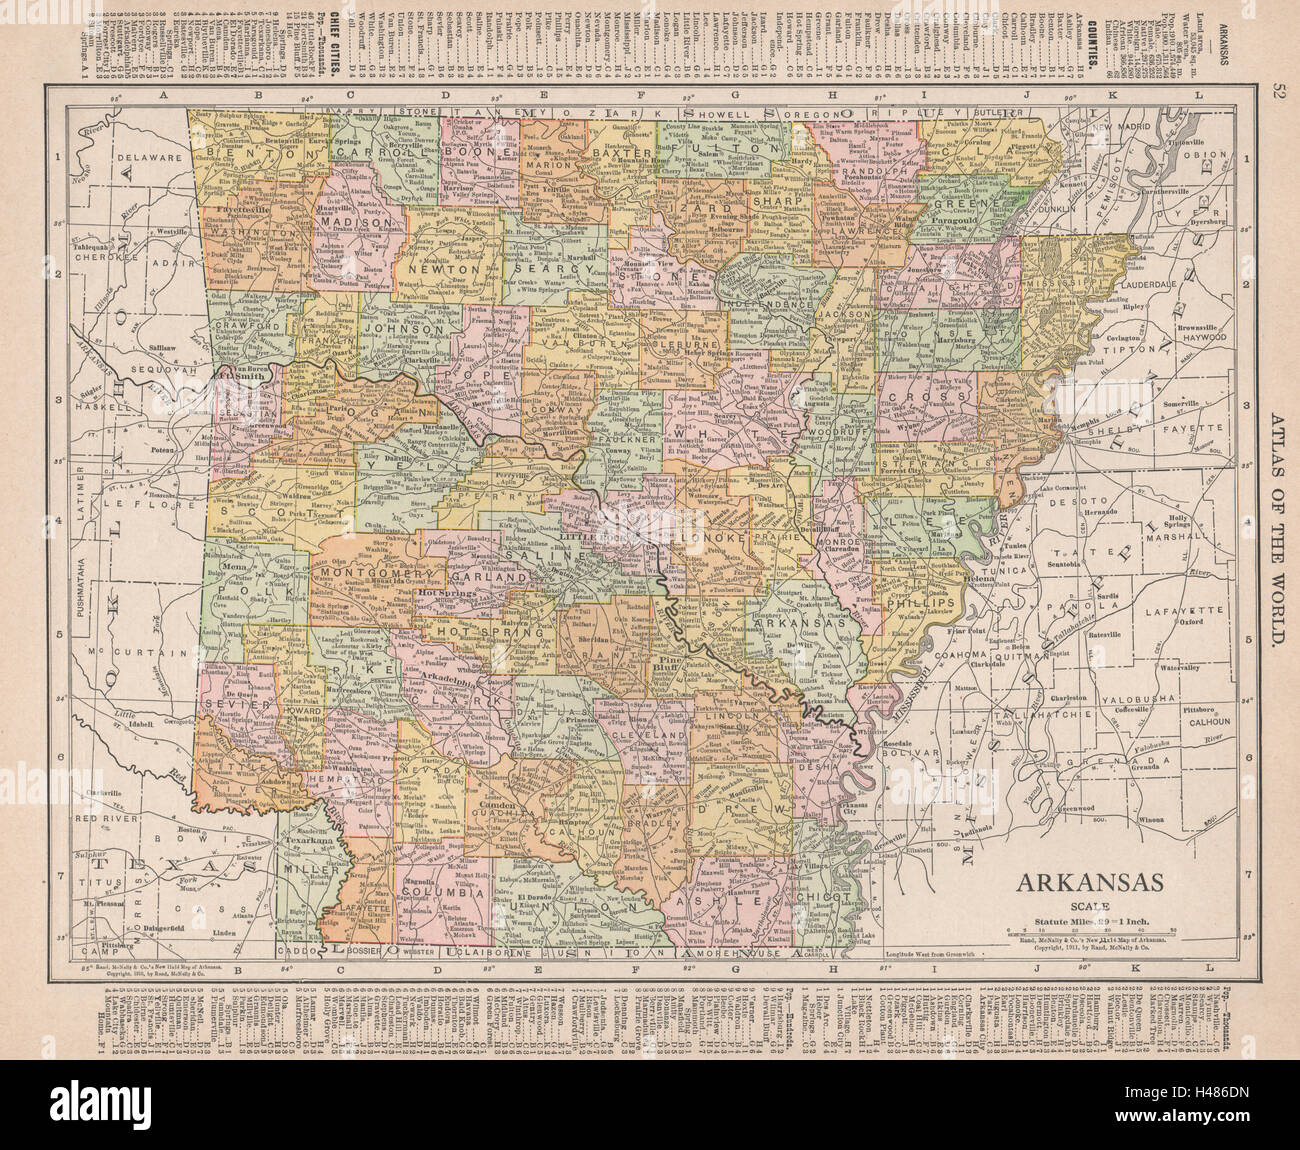 Arkansas state map showing counties. RAND MCNALLY 1912 old antique chart Stock Photo